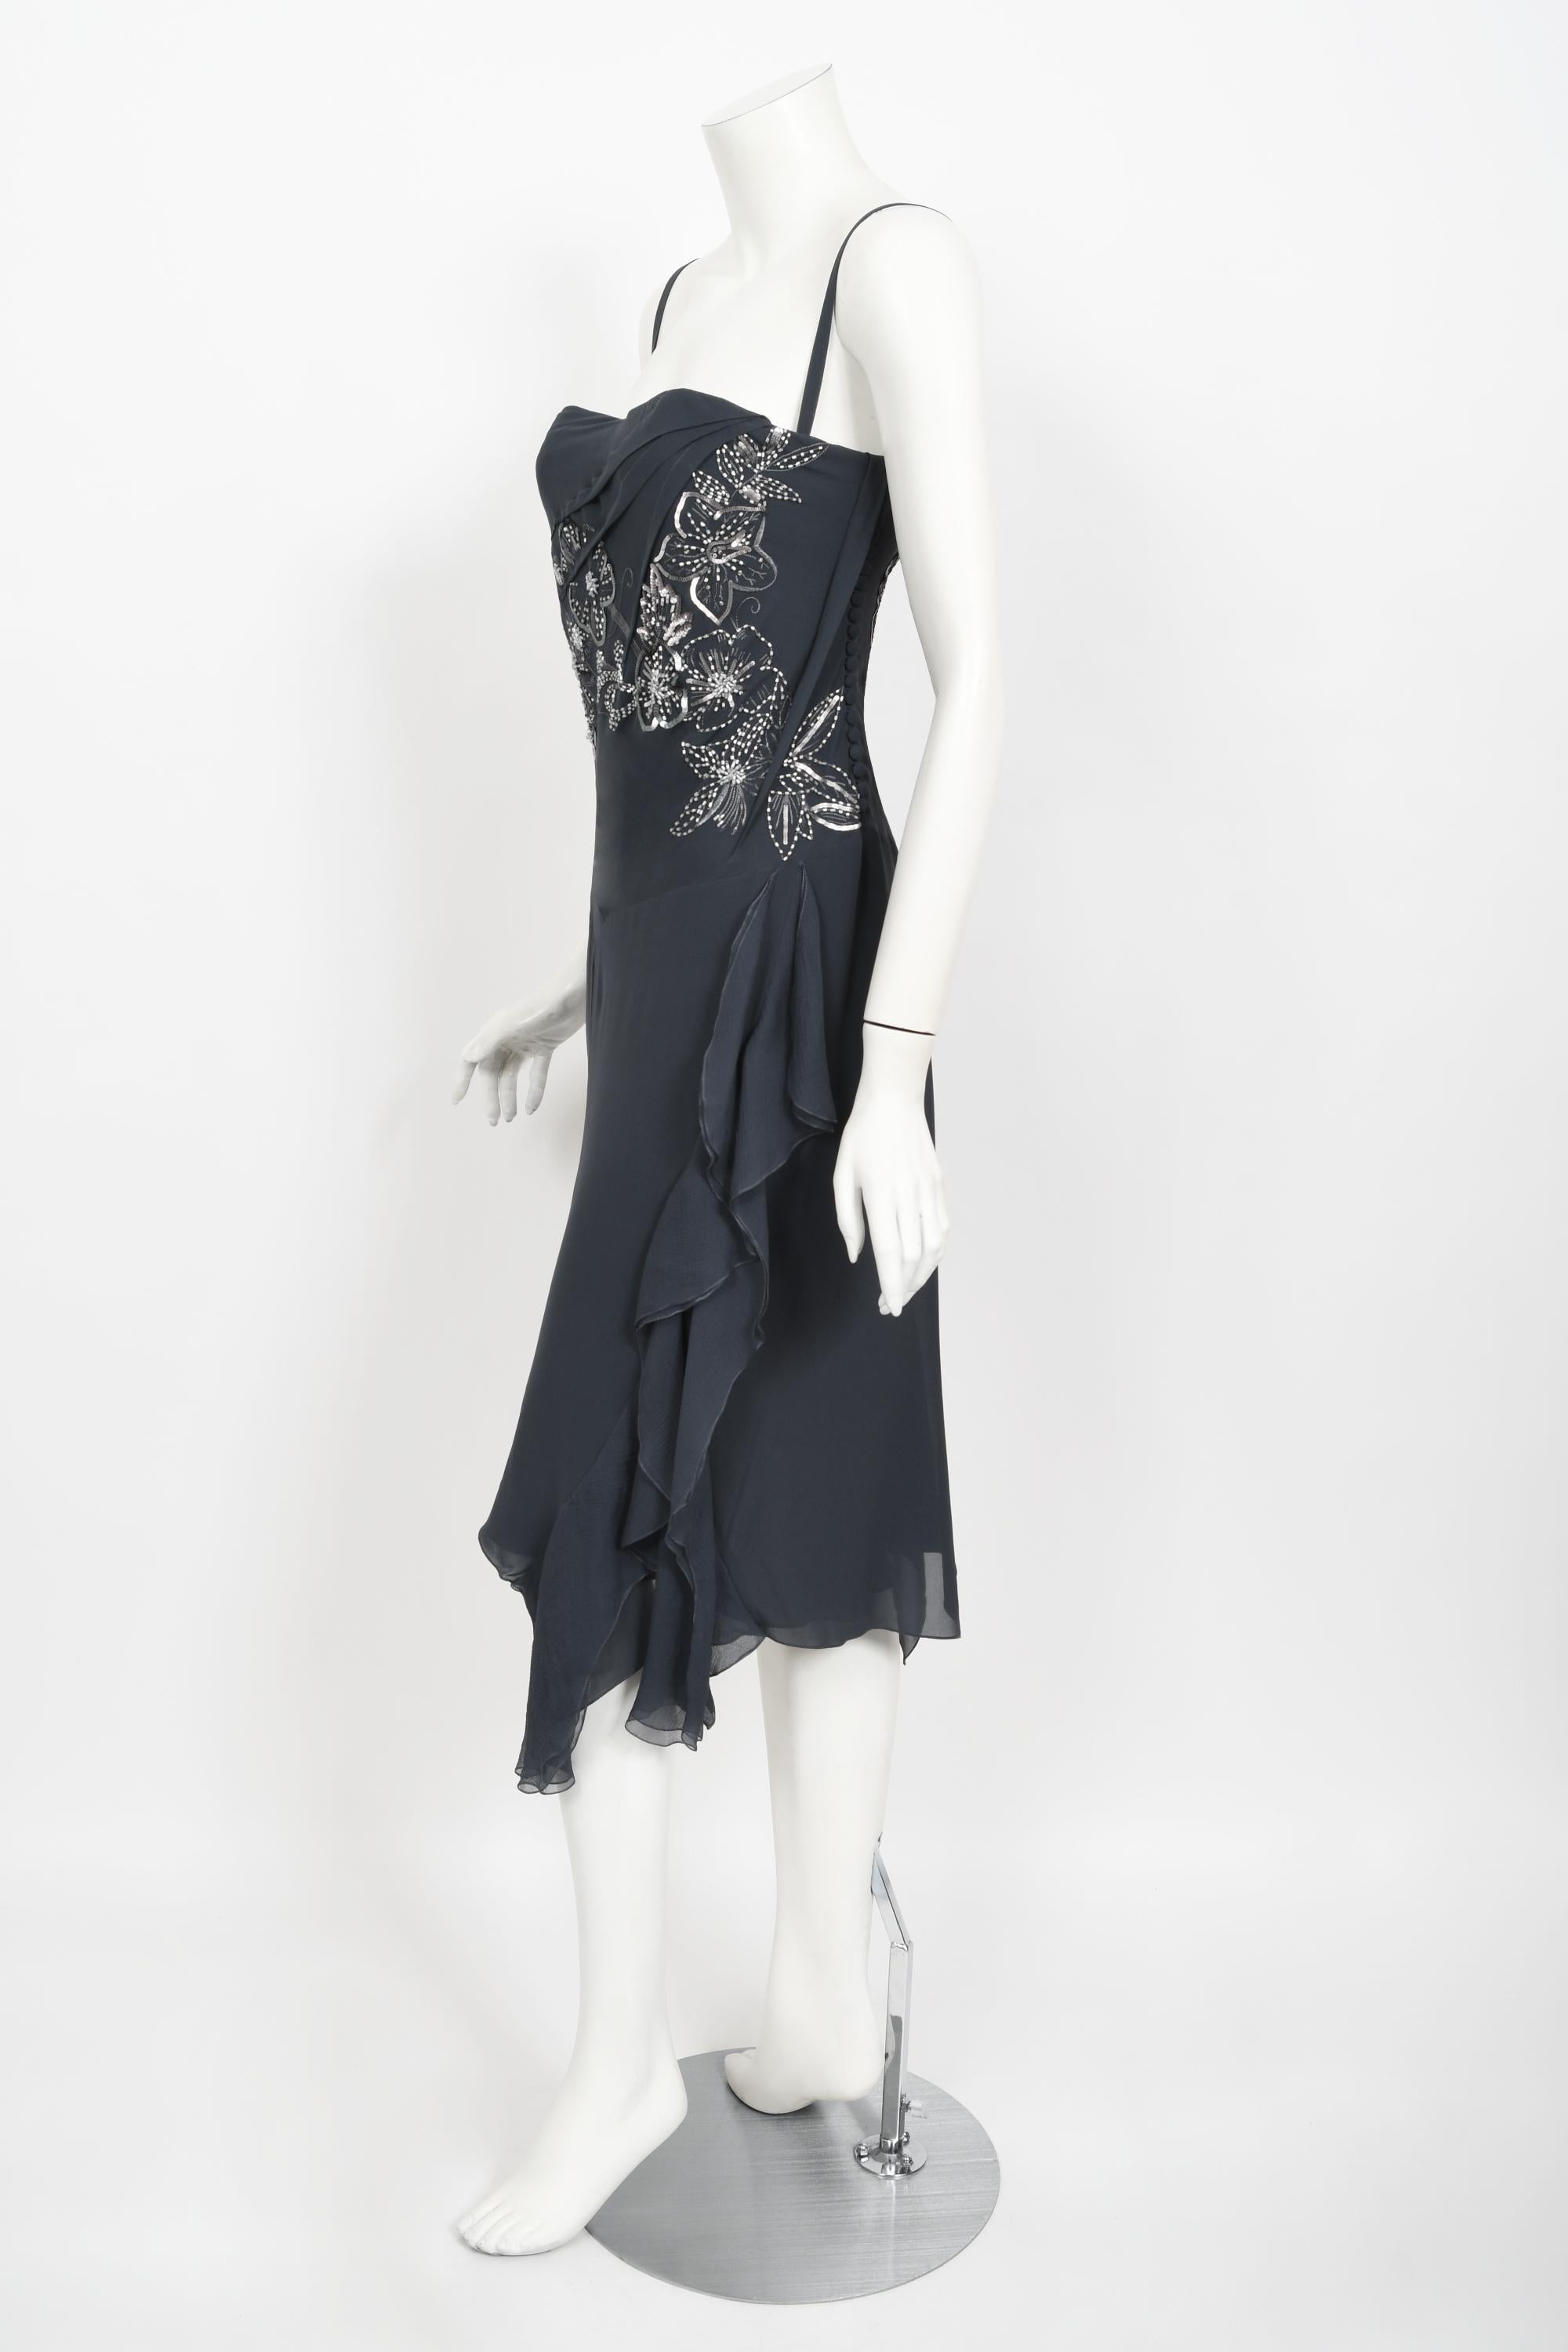 An absolutely stunning and highly coveted Christian Dior gunmetal grey beaded silk chiffon bias-cut bustier dress dating back to John Galliano's 2006 fall-winter collection. John Galliano is widely considered one of the most innovative and